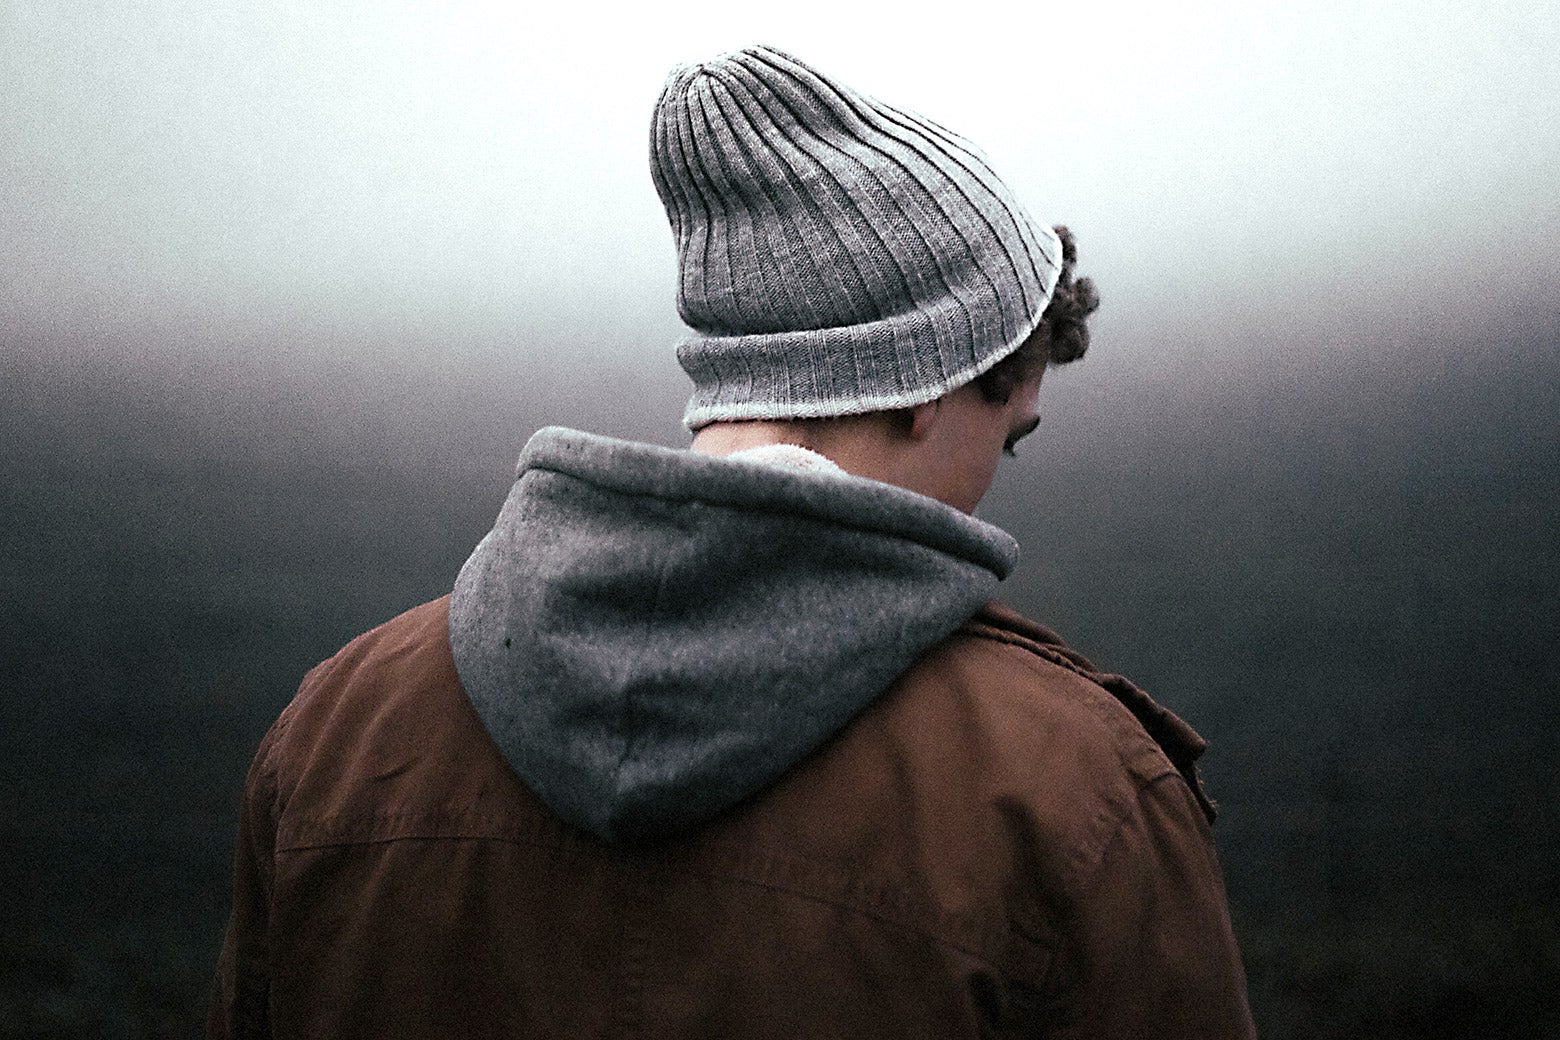 A teenaged boy with a coat and knit hat facing away from the camera.